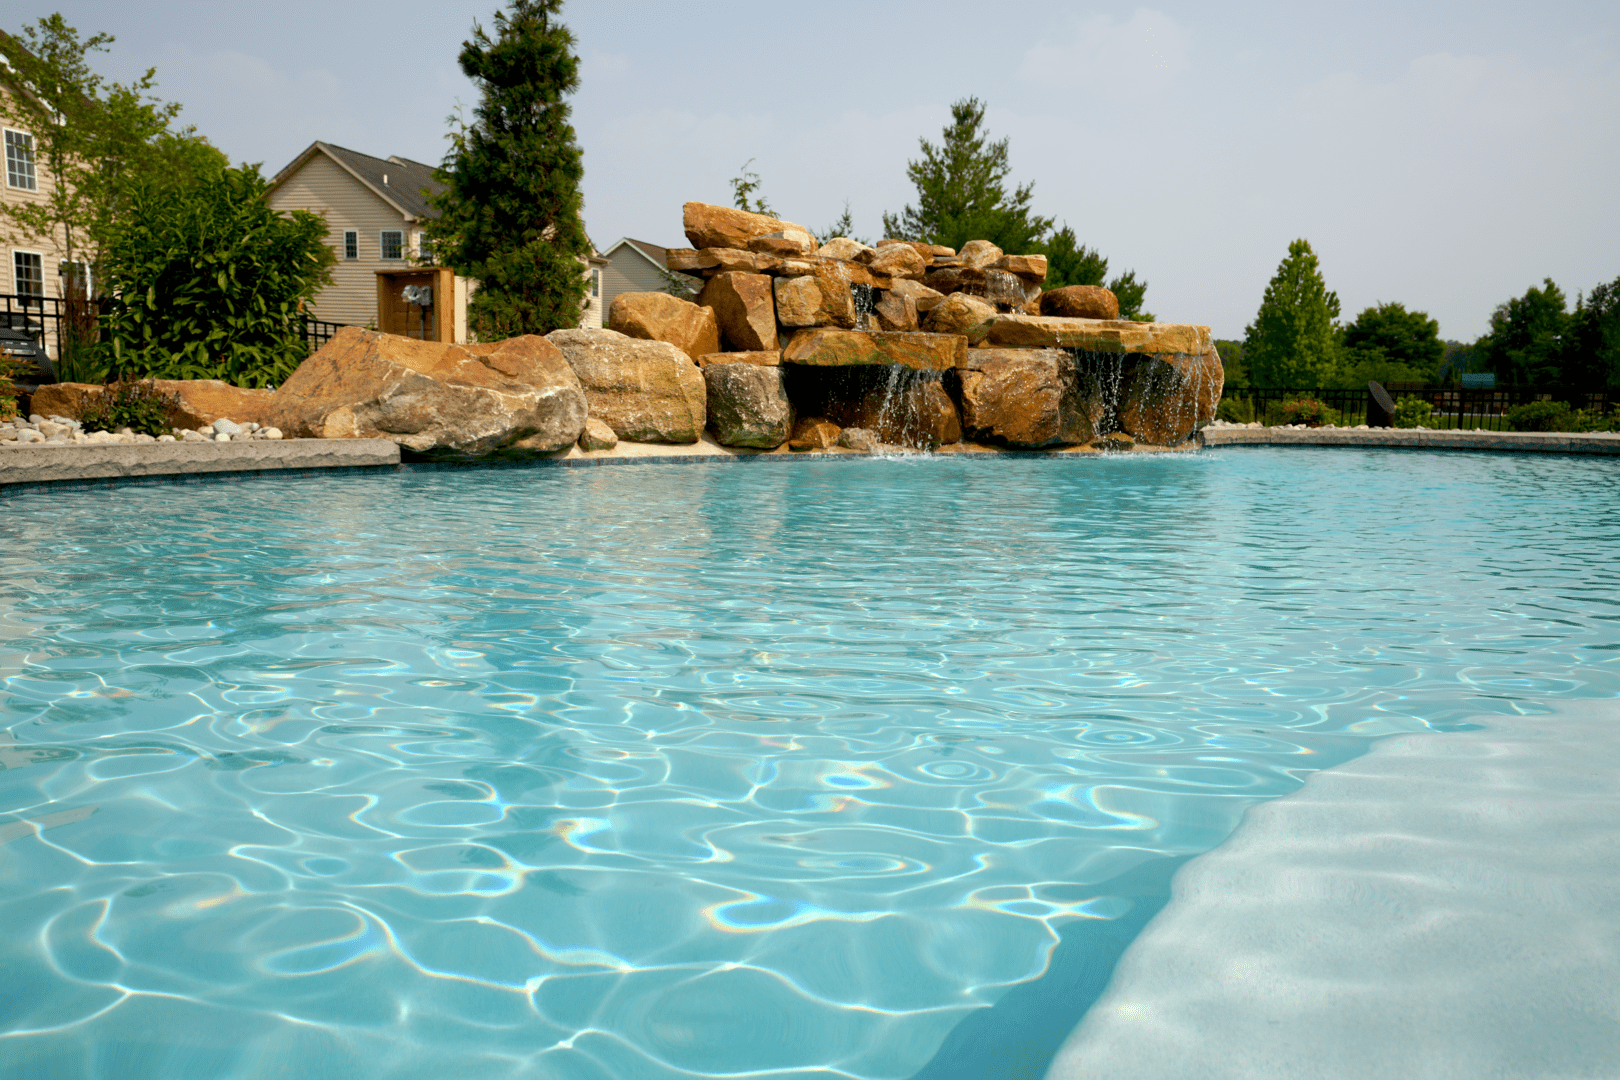 A blue swimming pool with an innovative pool design.